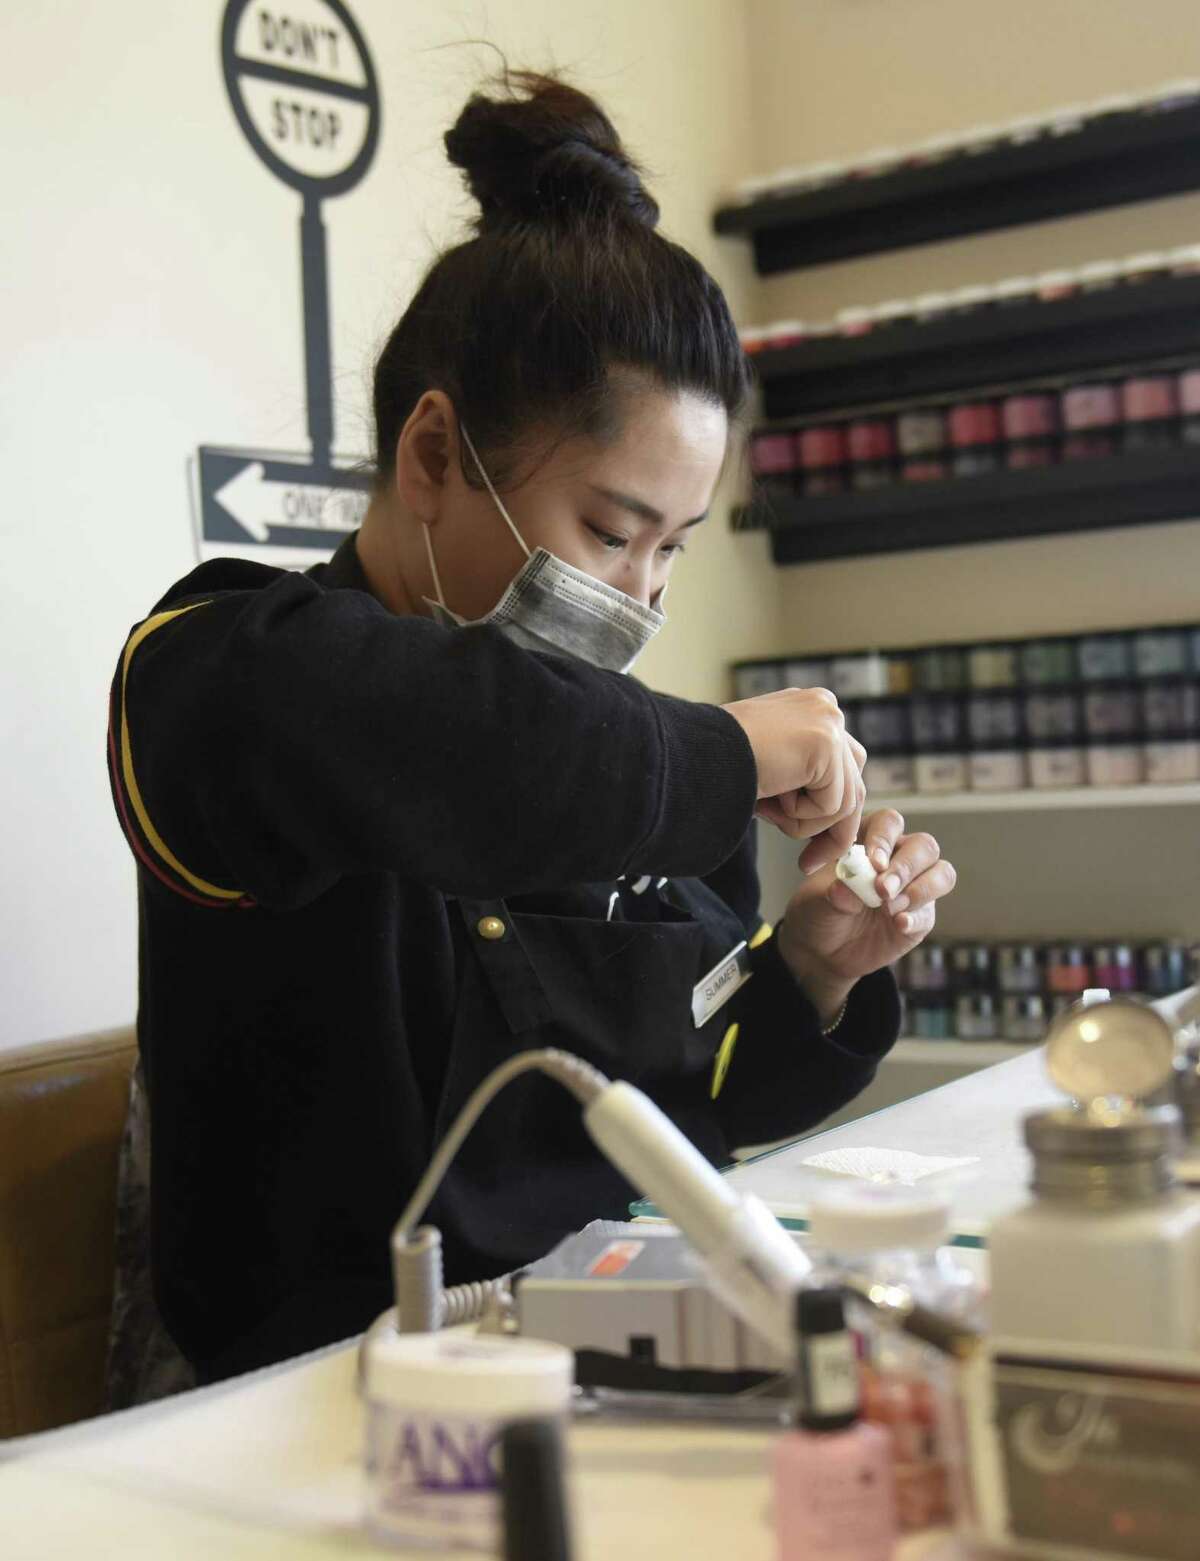 Employees work at a nail salon in Stamford, Conn. Wednesday, Jan. 16, 2019. Since 2015, the Department of Labor has issued 91 stop work orders to Connecticut nail salons for labor law violations, including to salons in Greenwich, Stamford, Milford, New Haven, Darien, Westport, Southport.